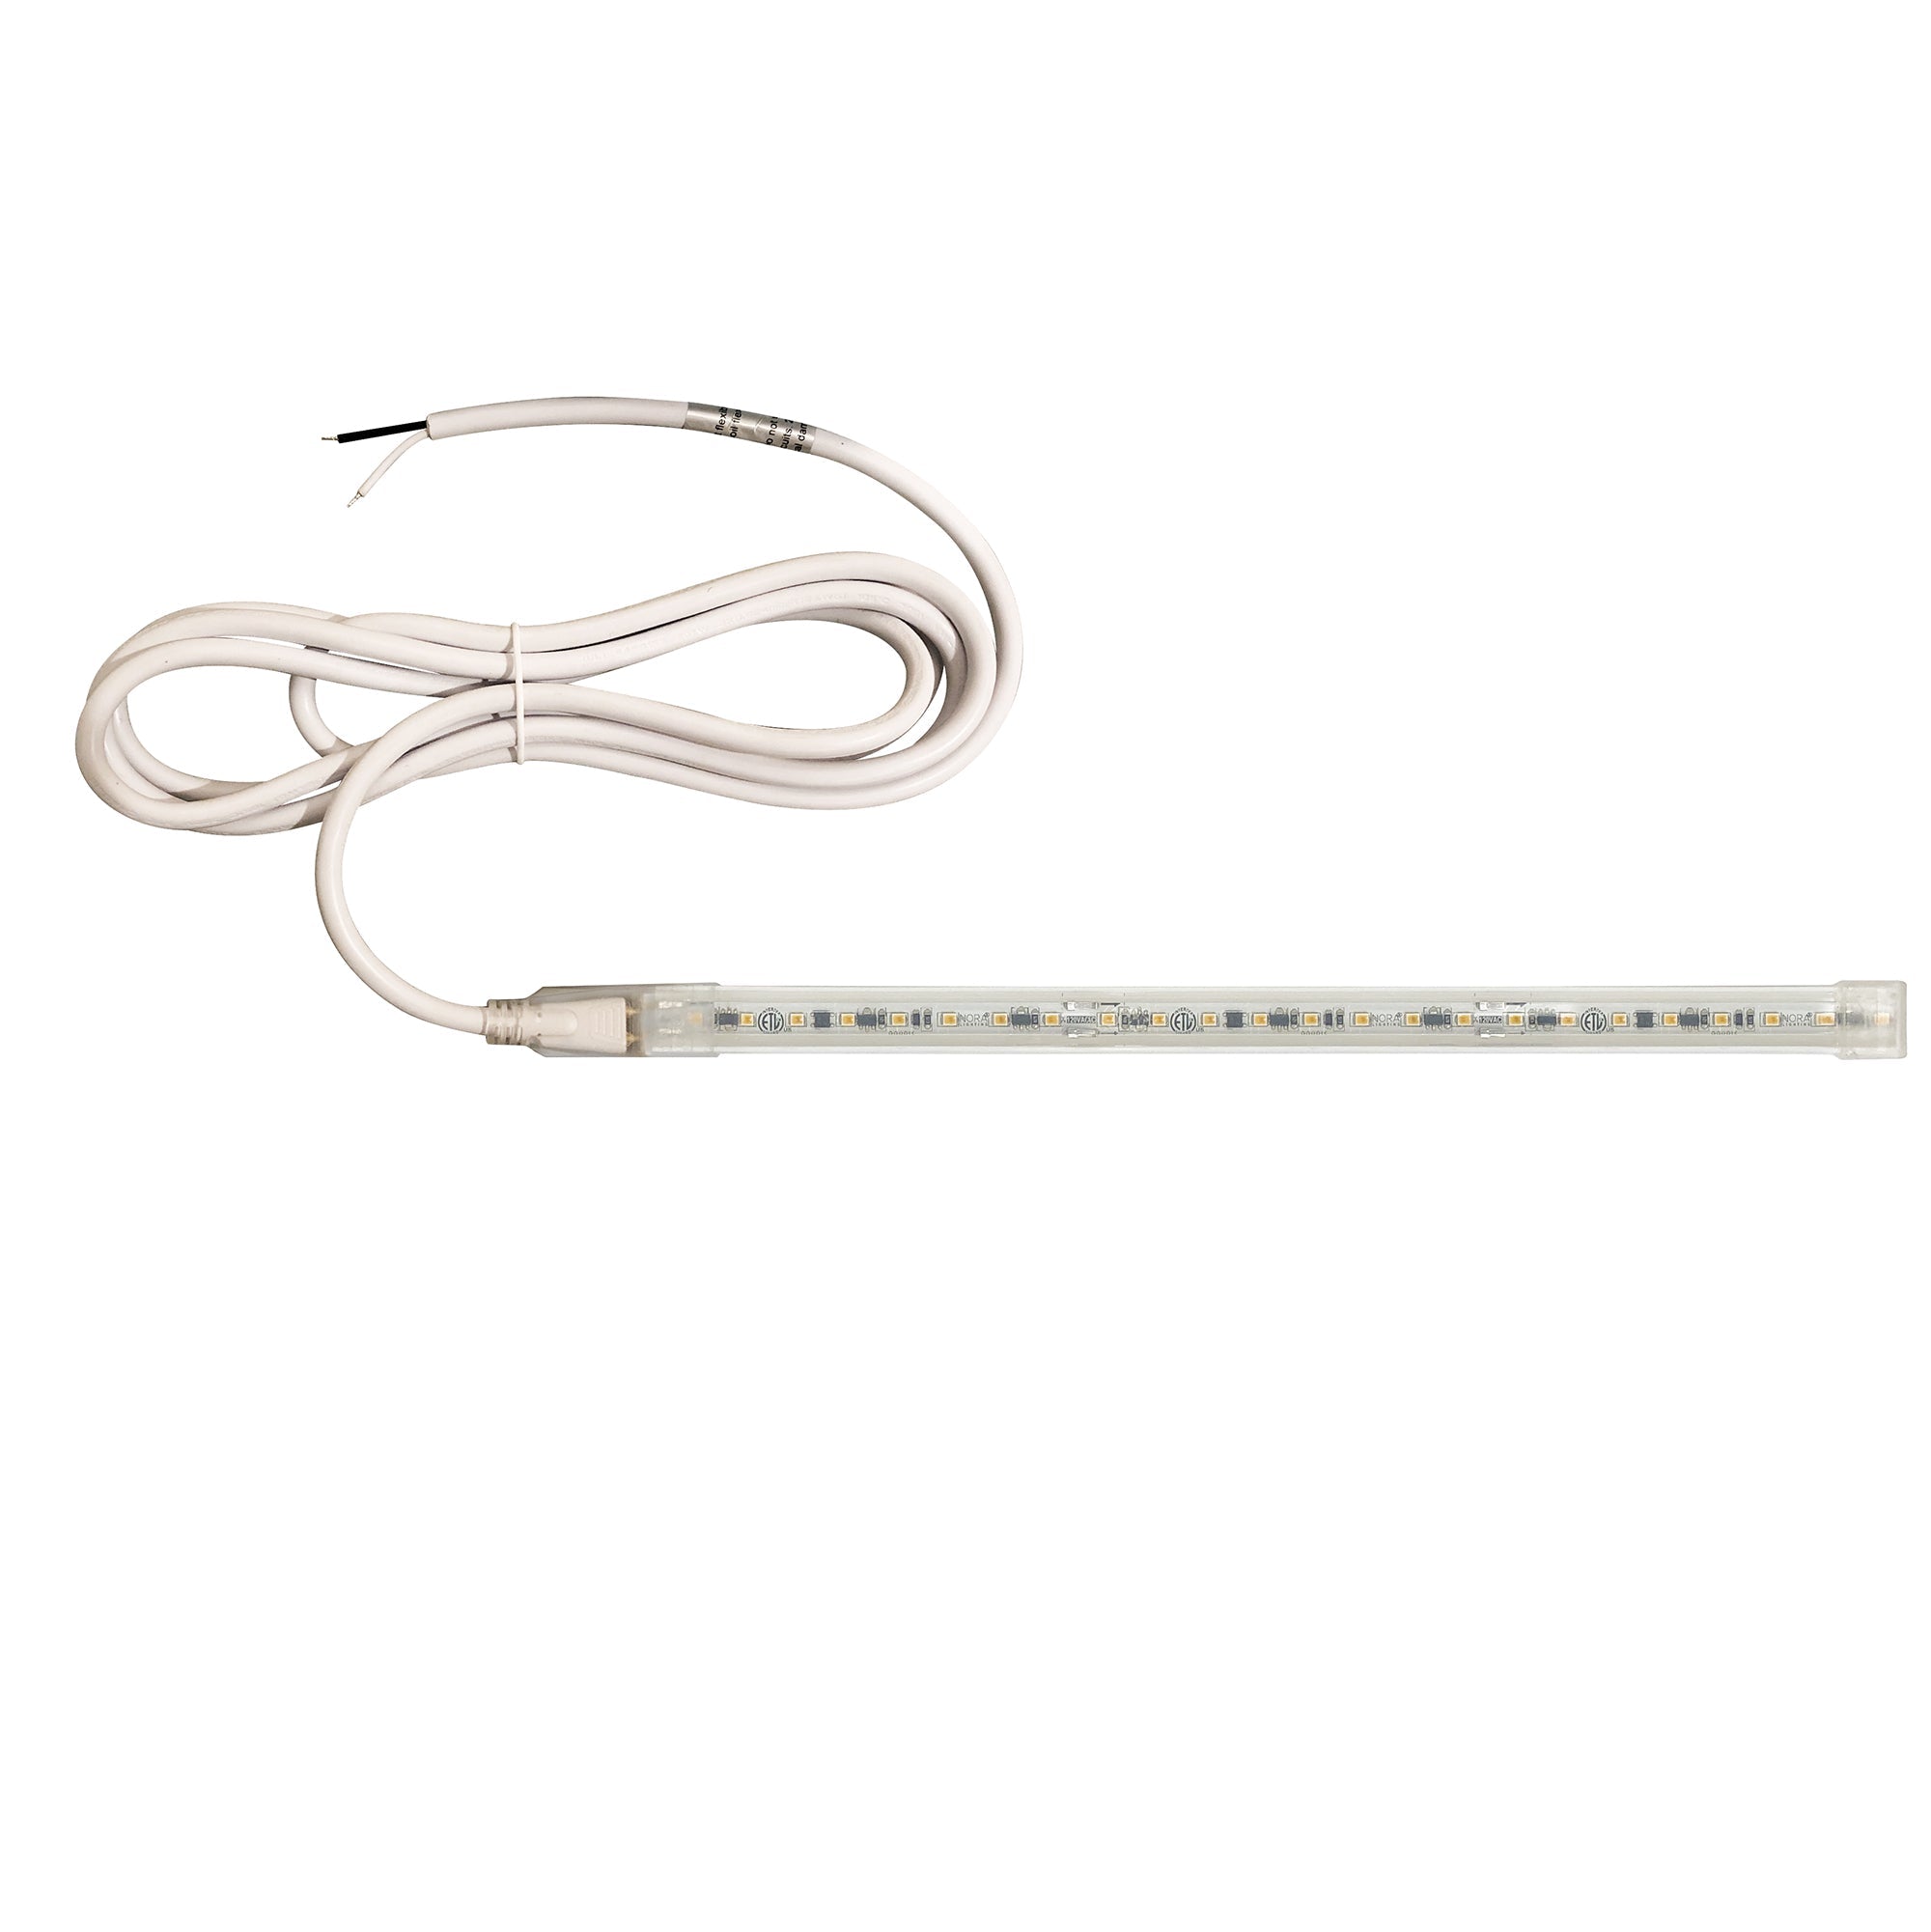 Nora Lighting NUTP13-W90-12-930/HW - Accent / Undercabinet - Custom Cut 90-ft 120V Continuous LED Tape Light, 330lm / 3.6W per foot, 3000K, w/ Mounting Clips and 8' Hardwired Power Cord